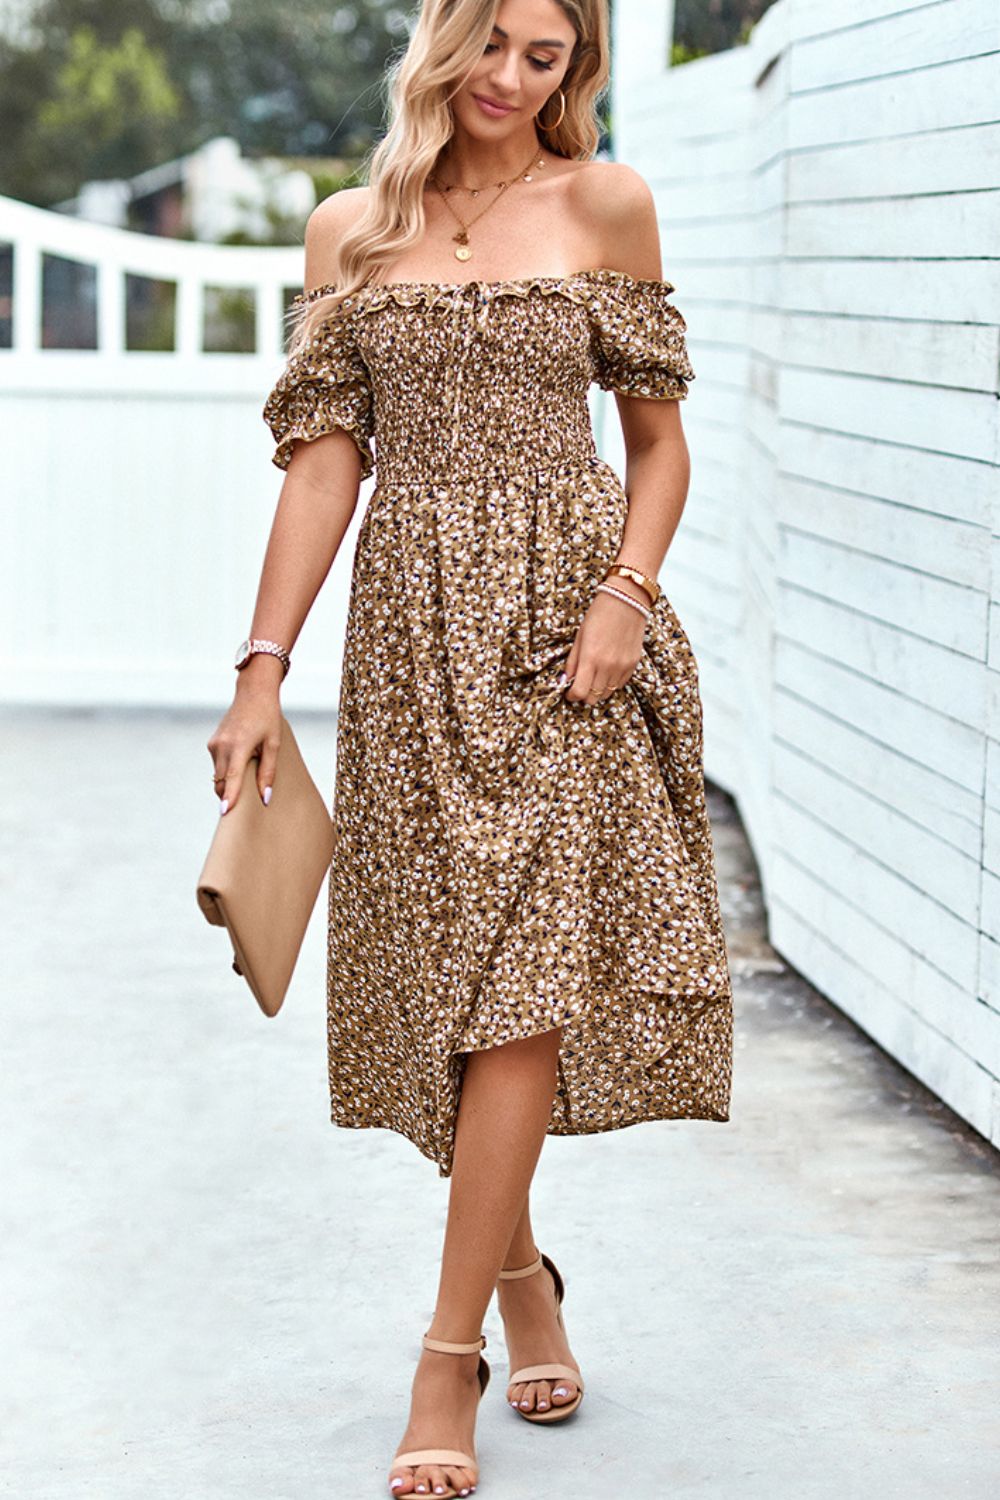 Floral Ruffled Square Neck Dress with Pockets - Runway Frenzy